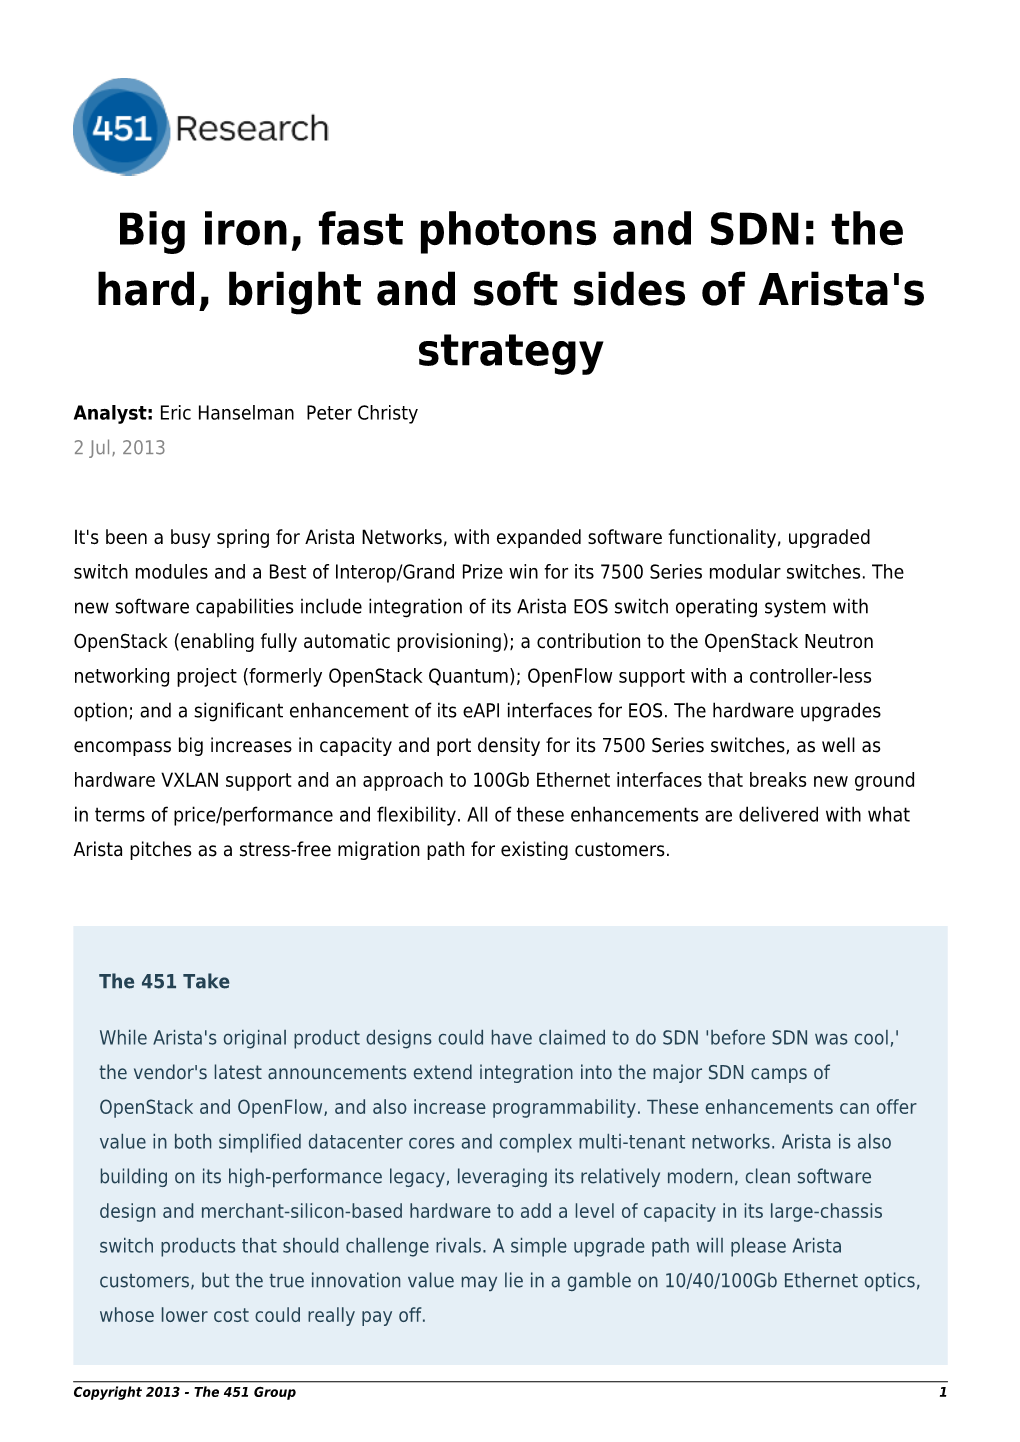 Big Iron, Fast Photons and SDN: the Hard, Bright and Soft Sides of Arista's Strategy